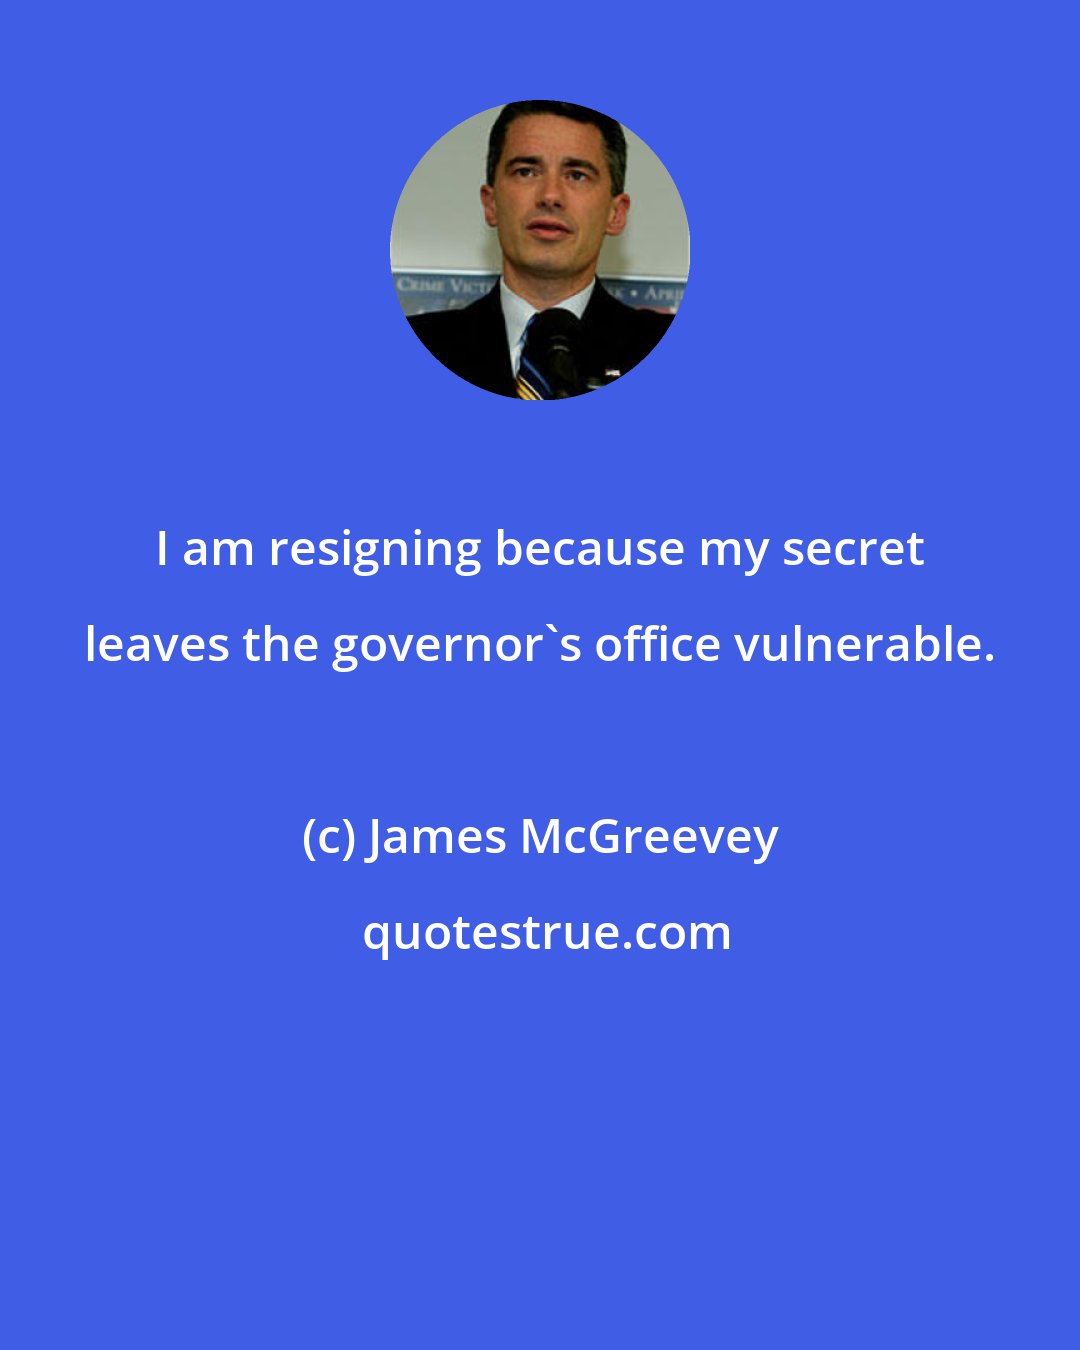 James McGreevey: I am resigning because my secret leaves the governor's office vulnerable.